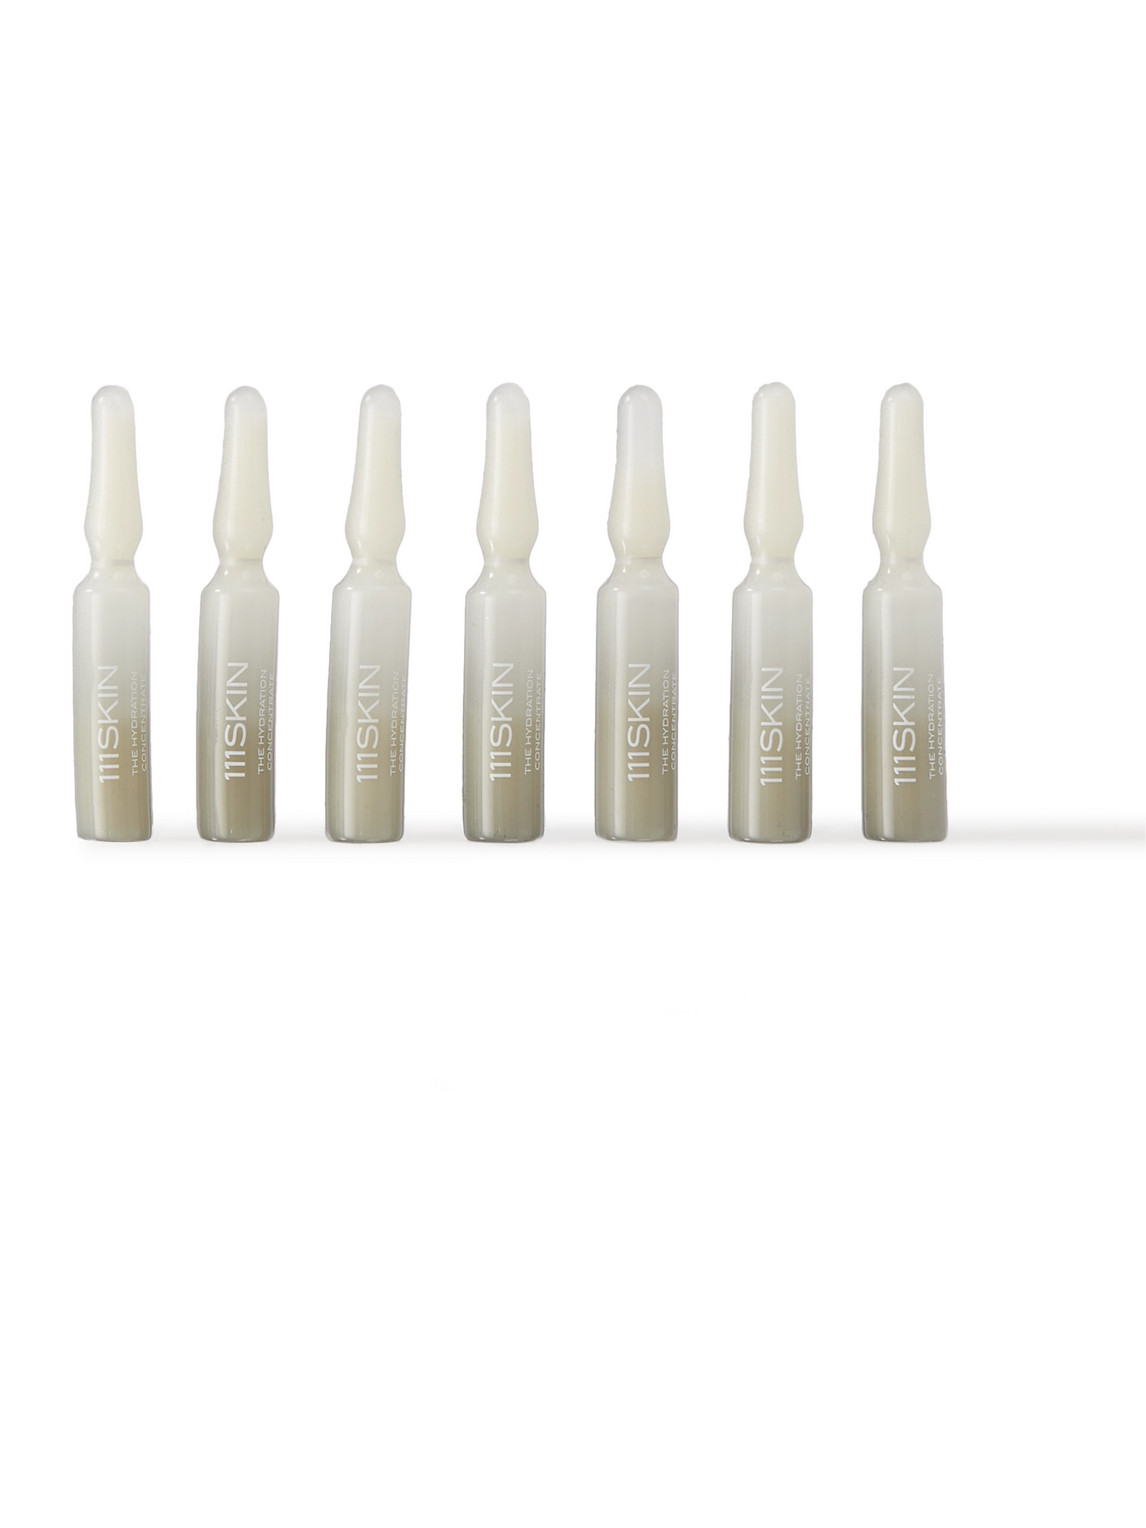 111skin The Hydration Concentrate, 7 X 2ml In Colorless